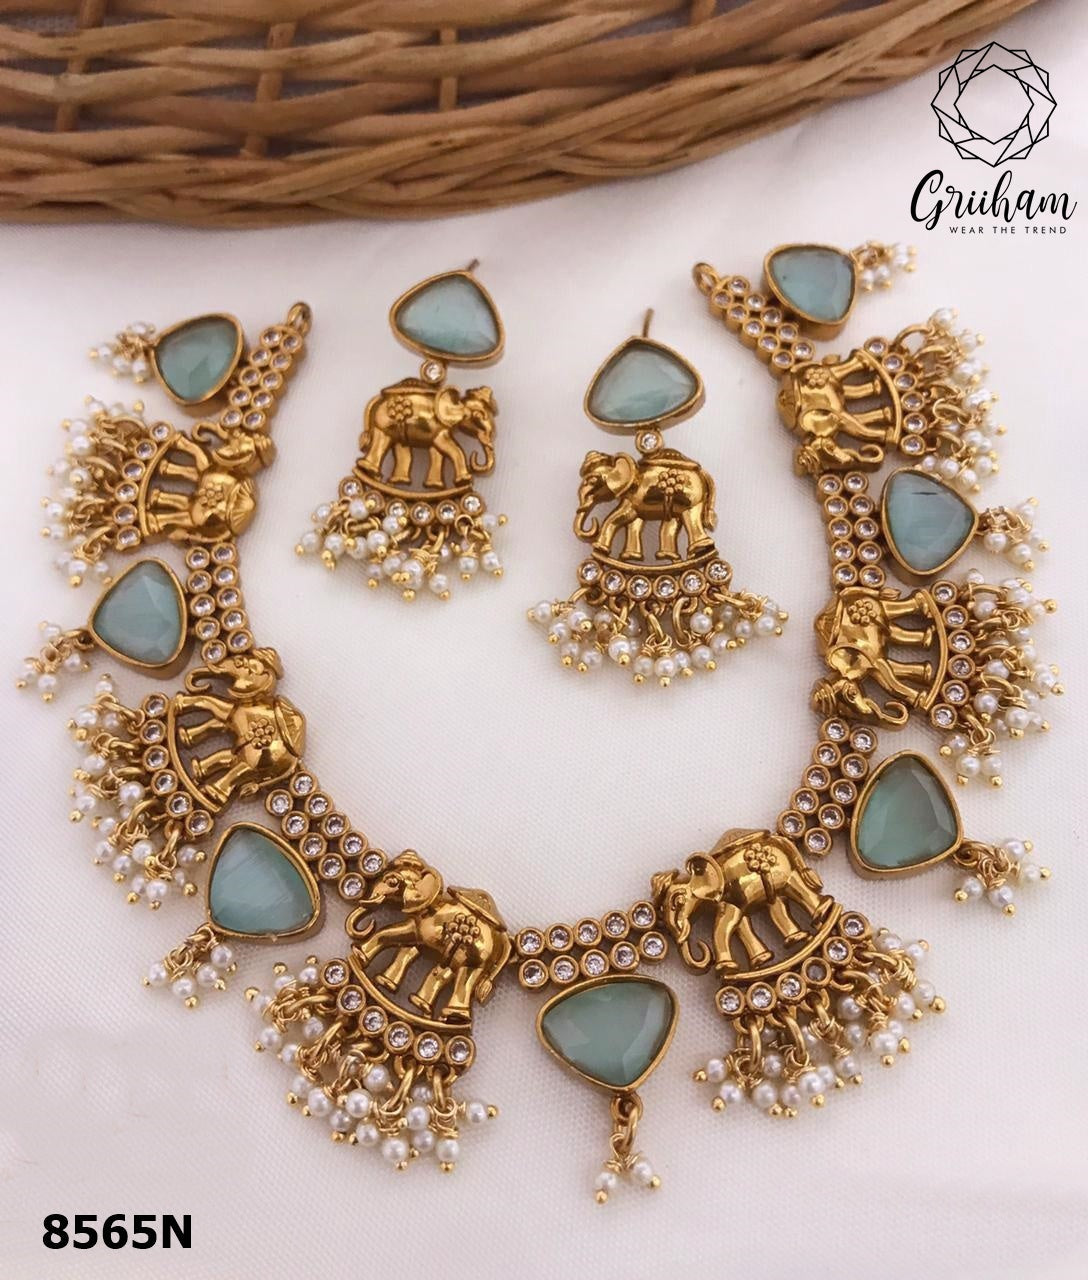 Premium Gold Plated Exclusive Necklace Set with diff Colours Monalisa Stones 8565N-Necklace Set-Griiham-Colour1-Griiham